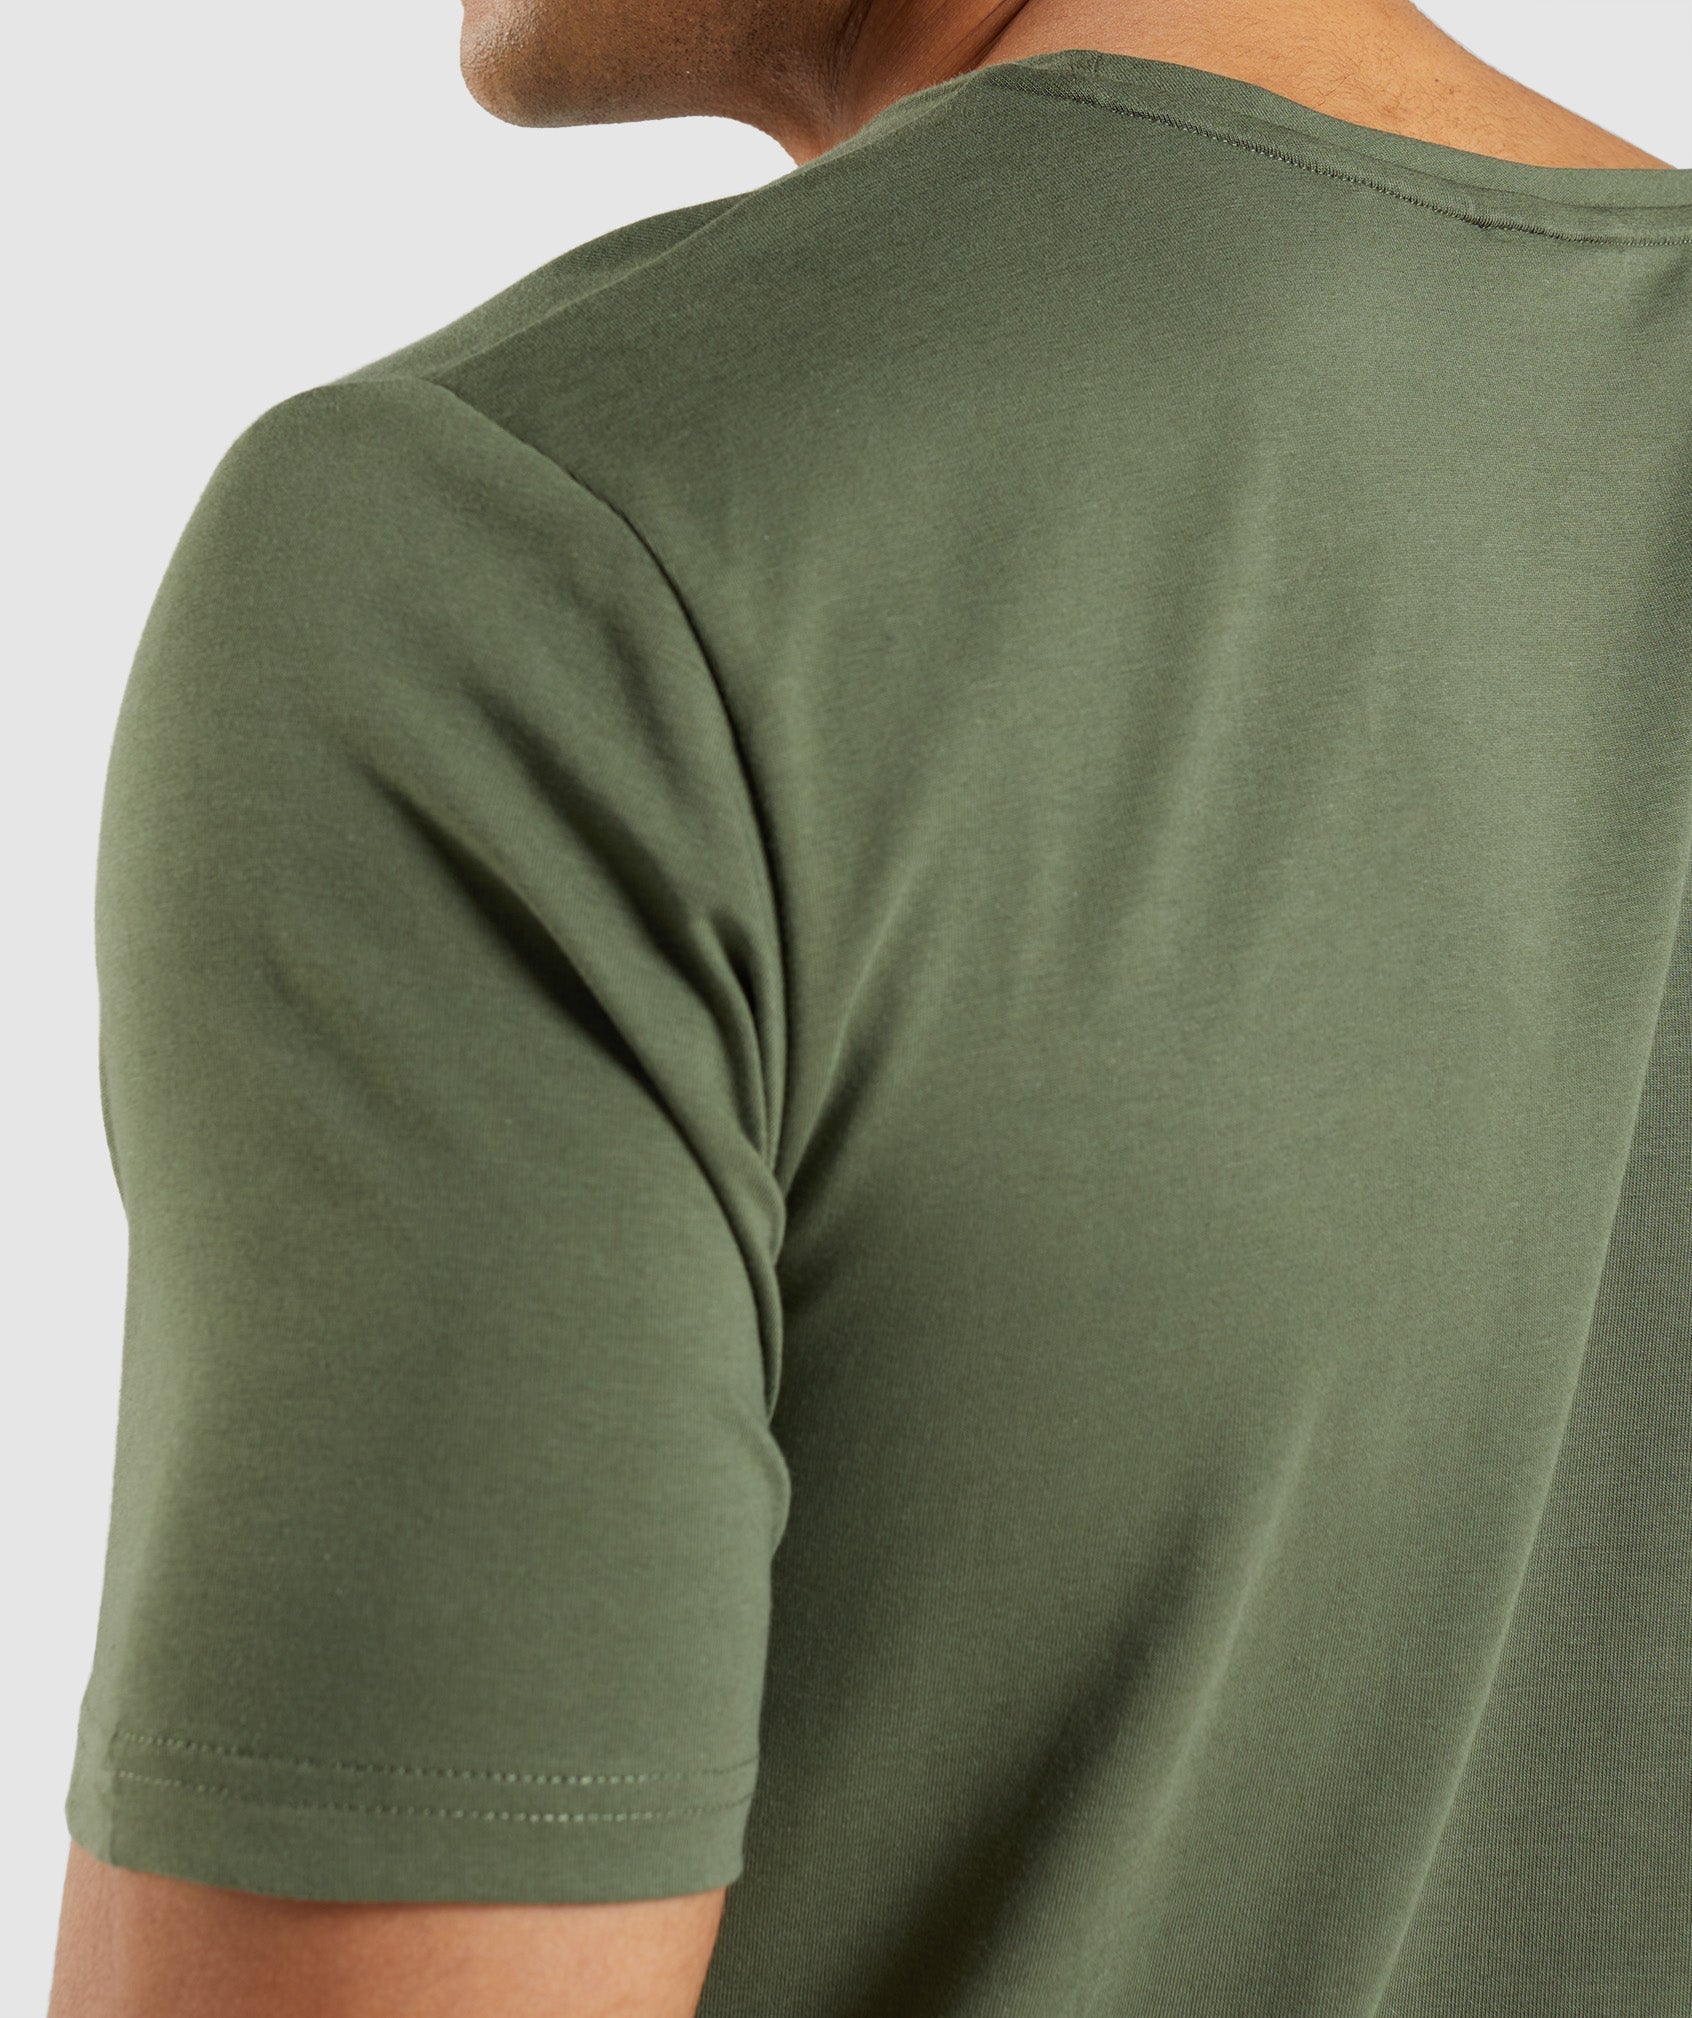 Essential T-Shirt in Core Olive - view 6